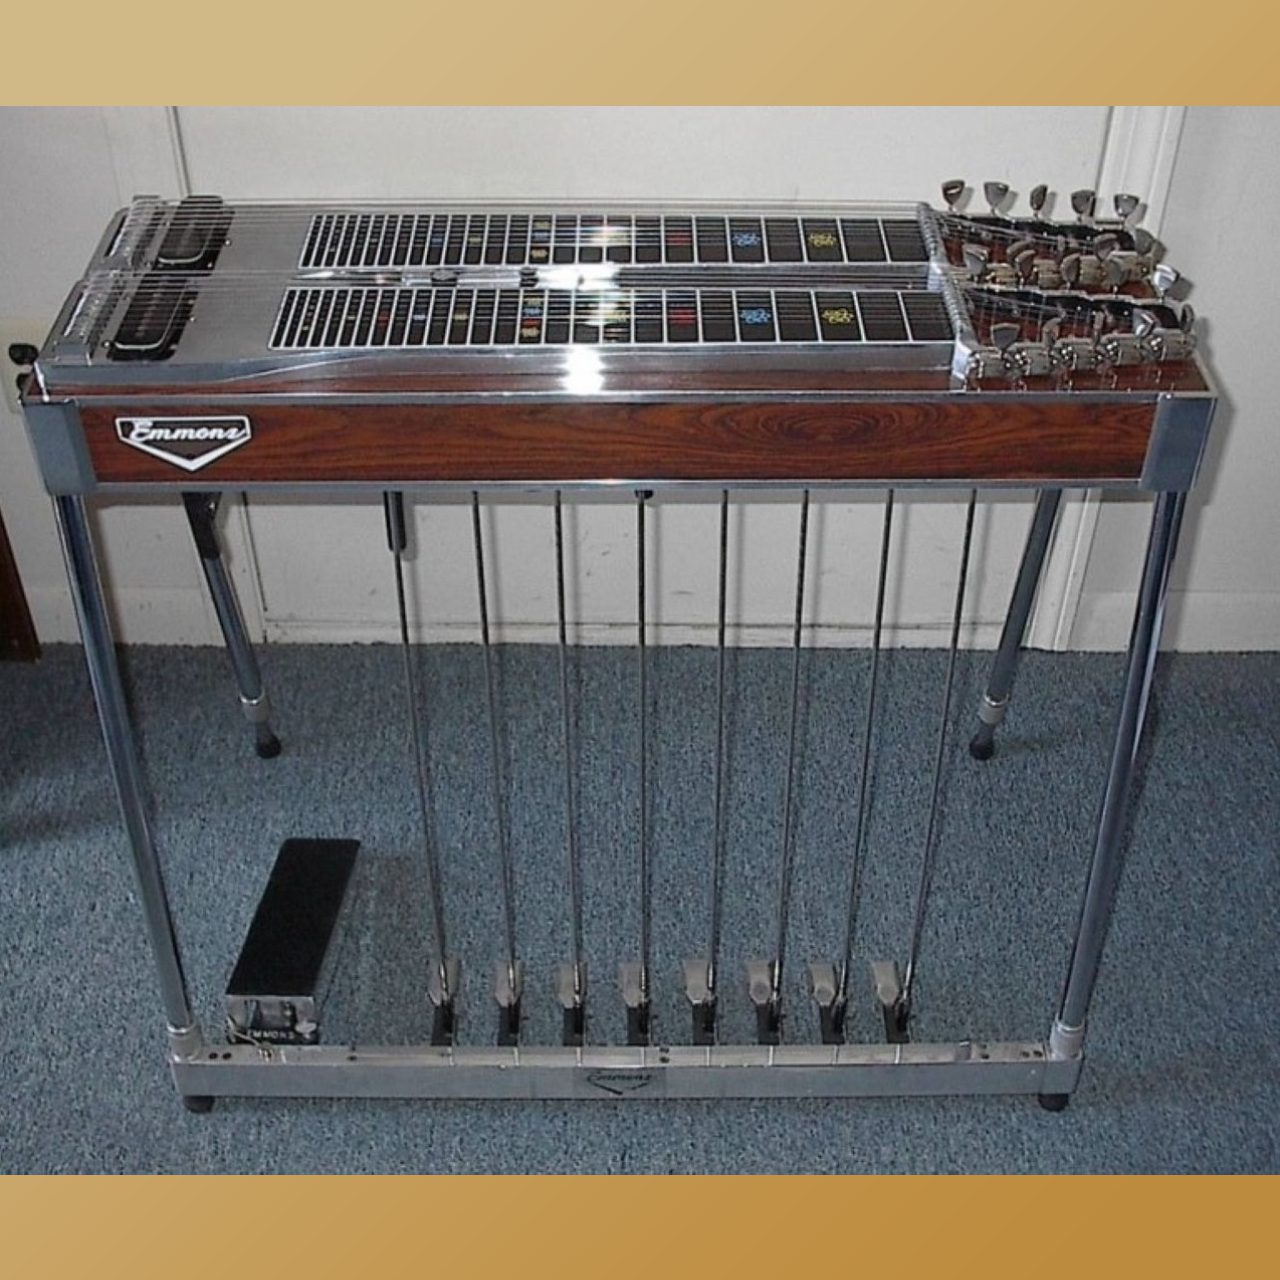 Pedal Steel Guitar Convention